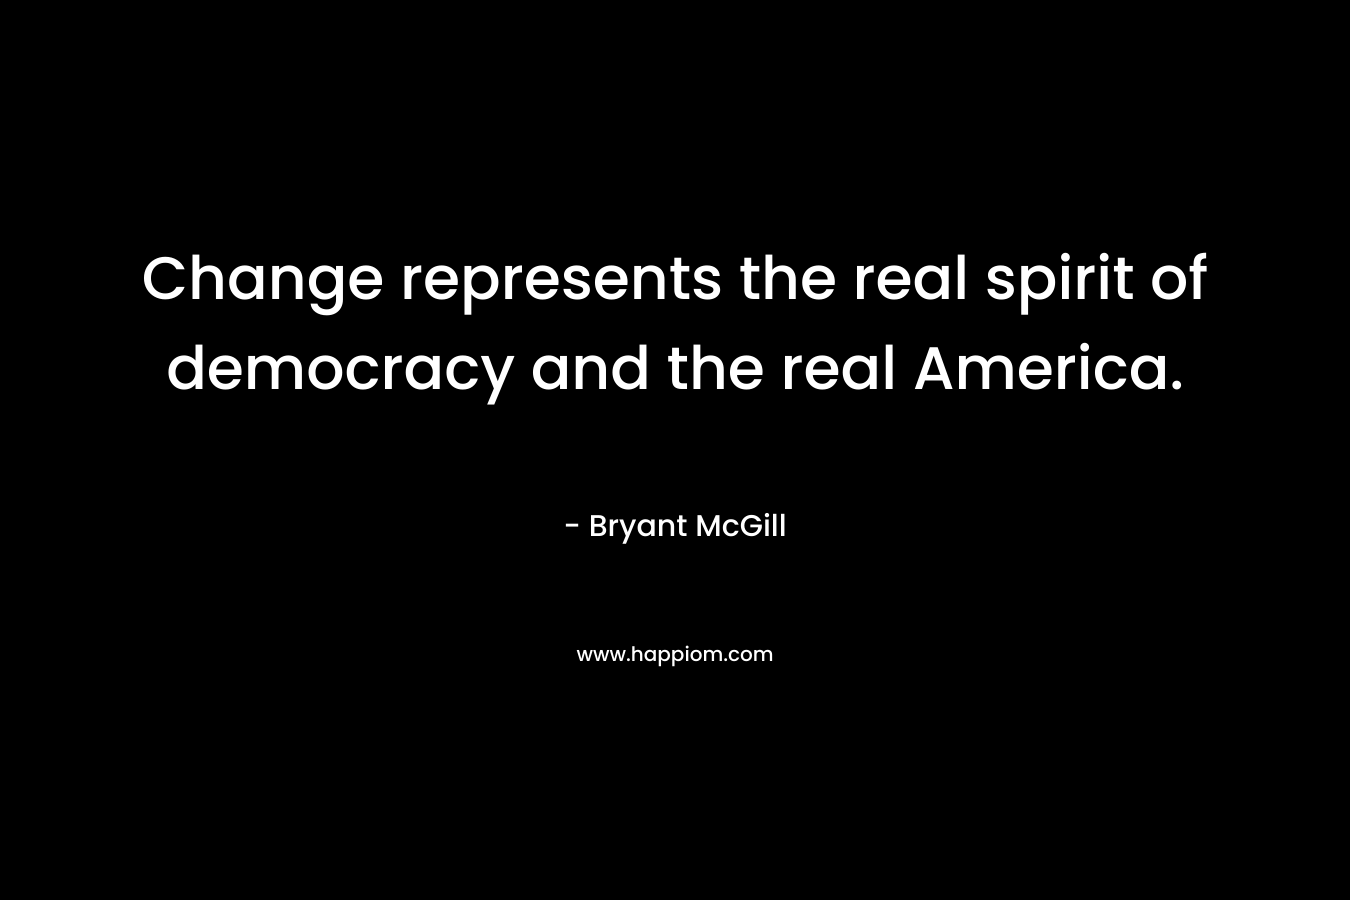 Change represents the real spirit of democracy and the real America. – Bryant McGill